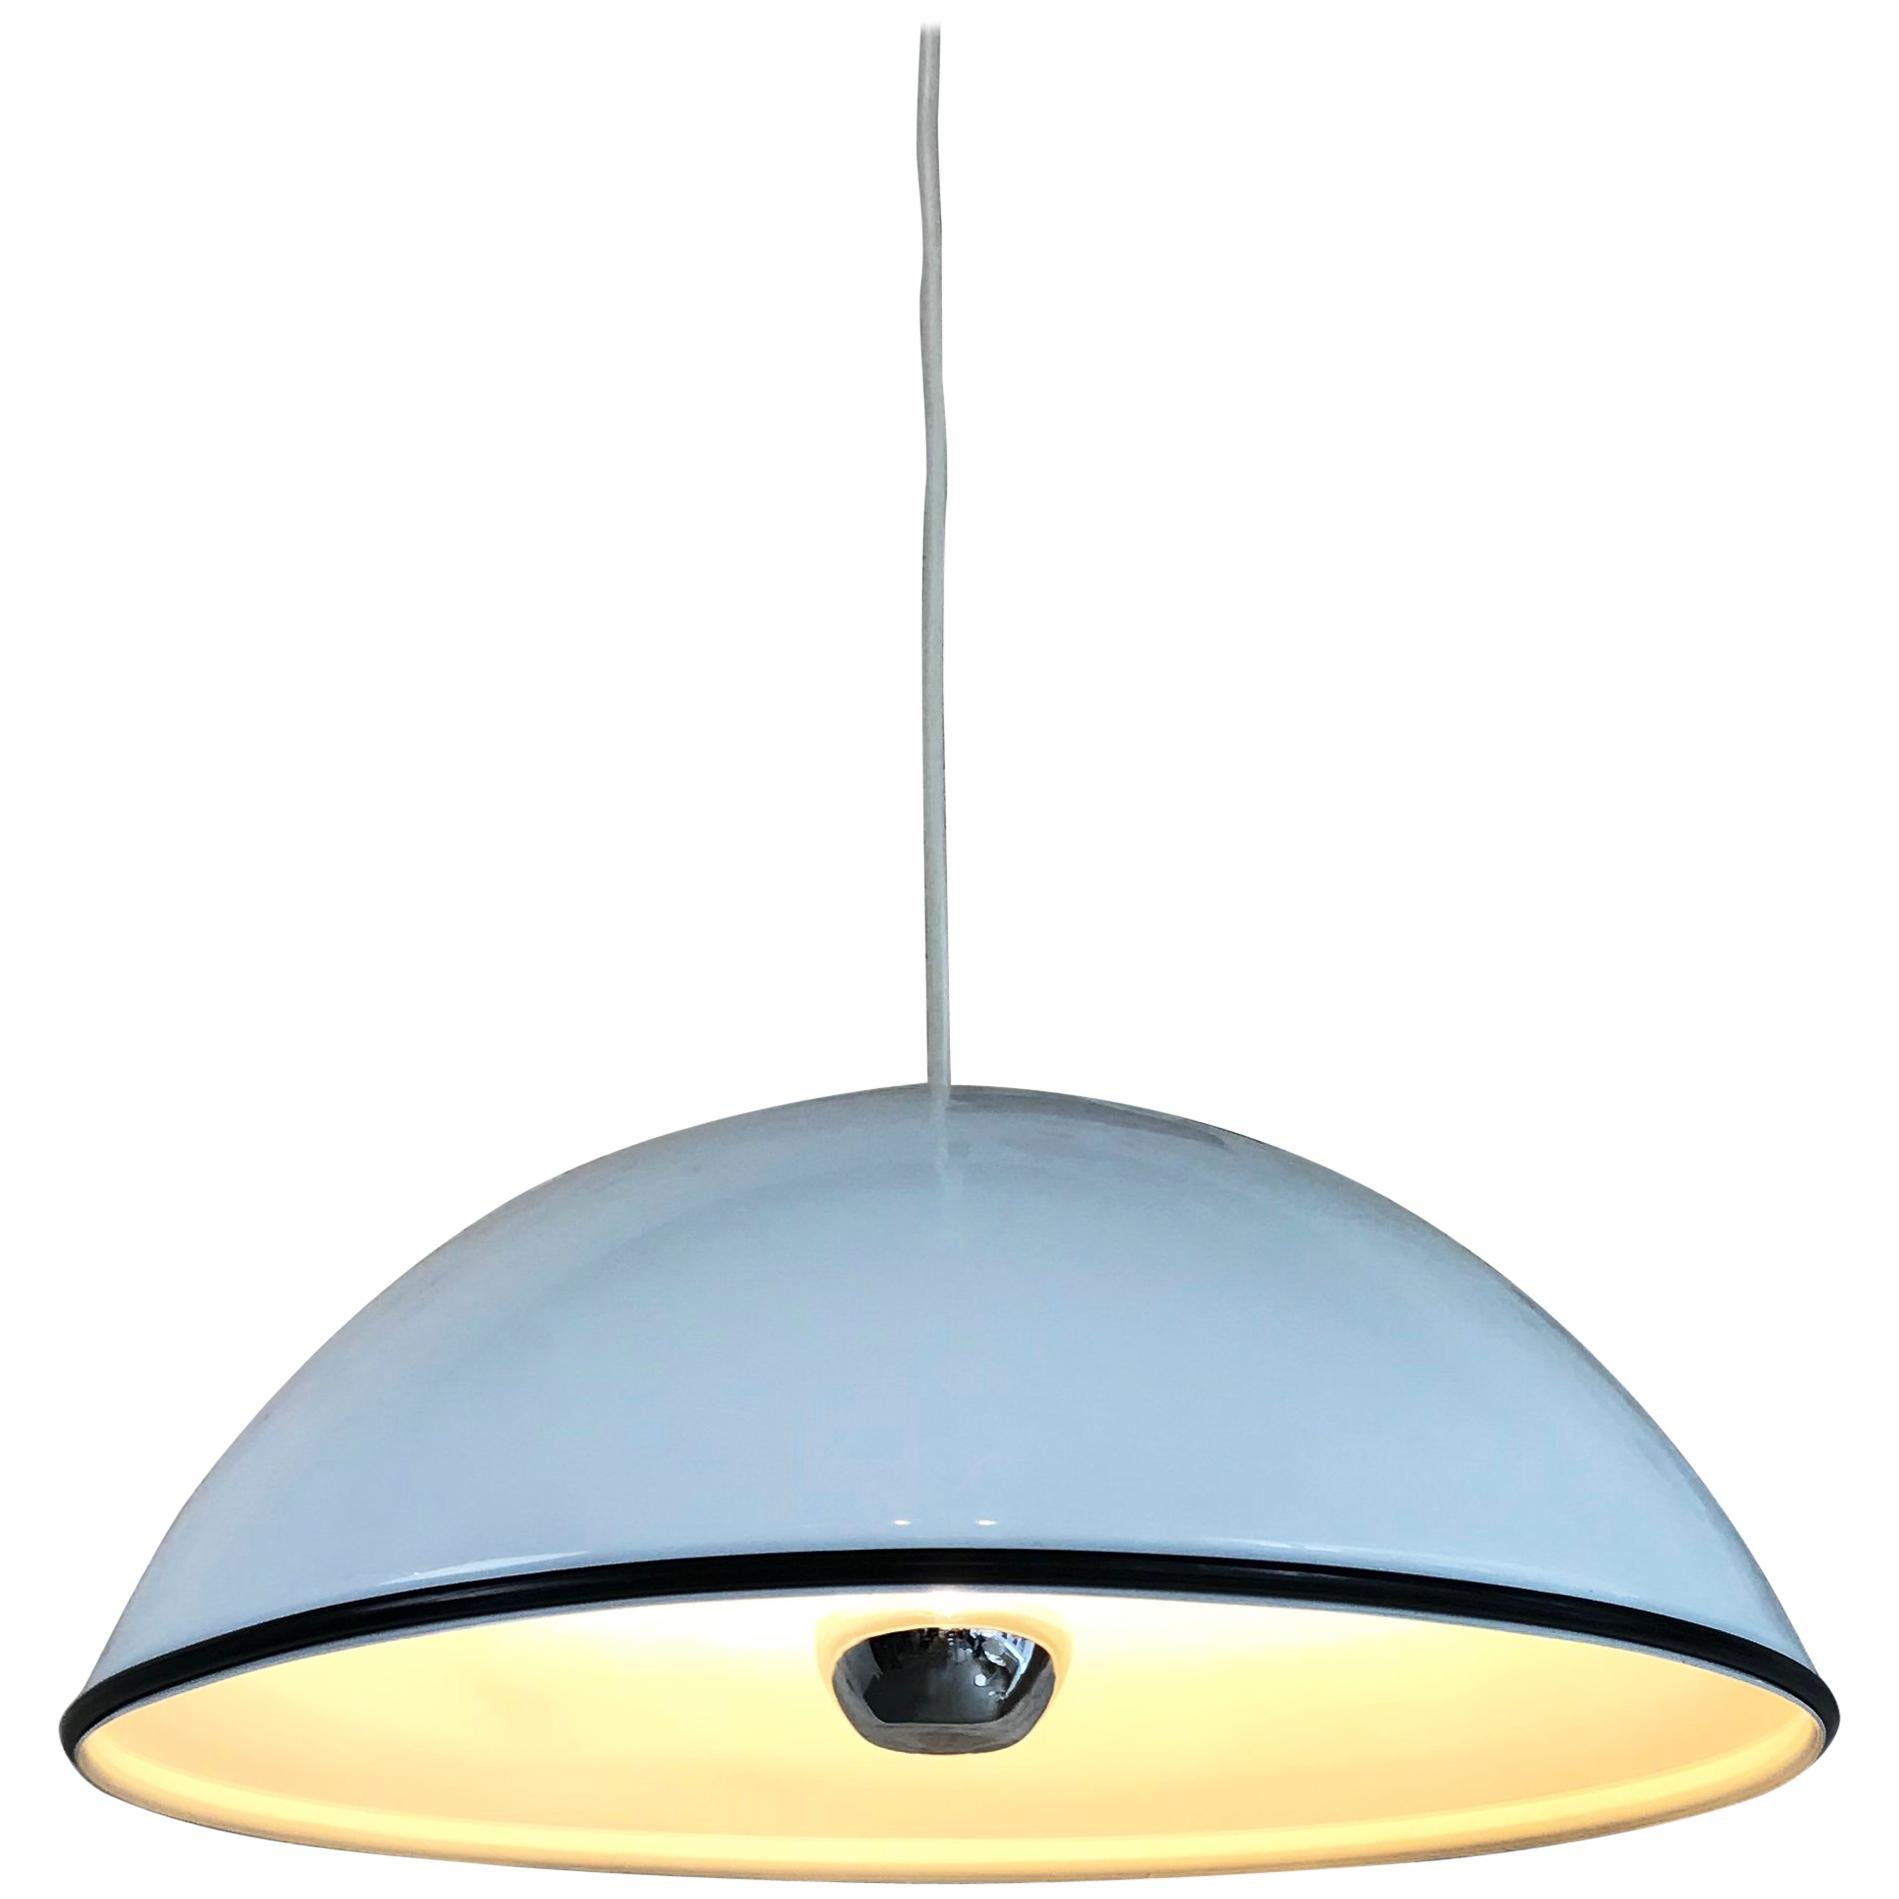 Vintage Pendant Lamp 'Relemme' by Castiglioni for Flos, Italy, 1962 For Sale